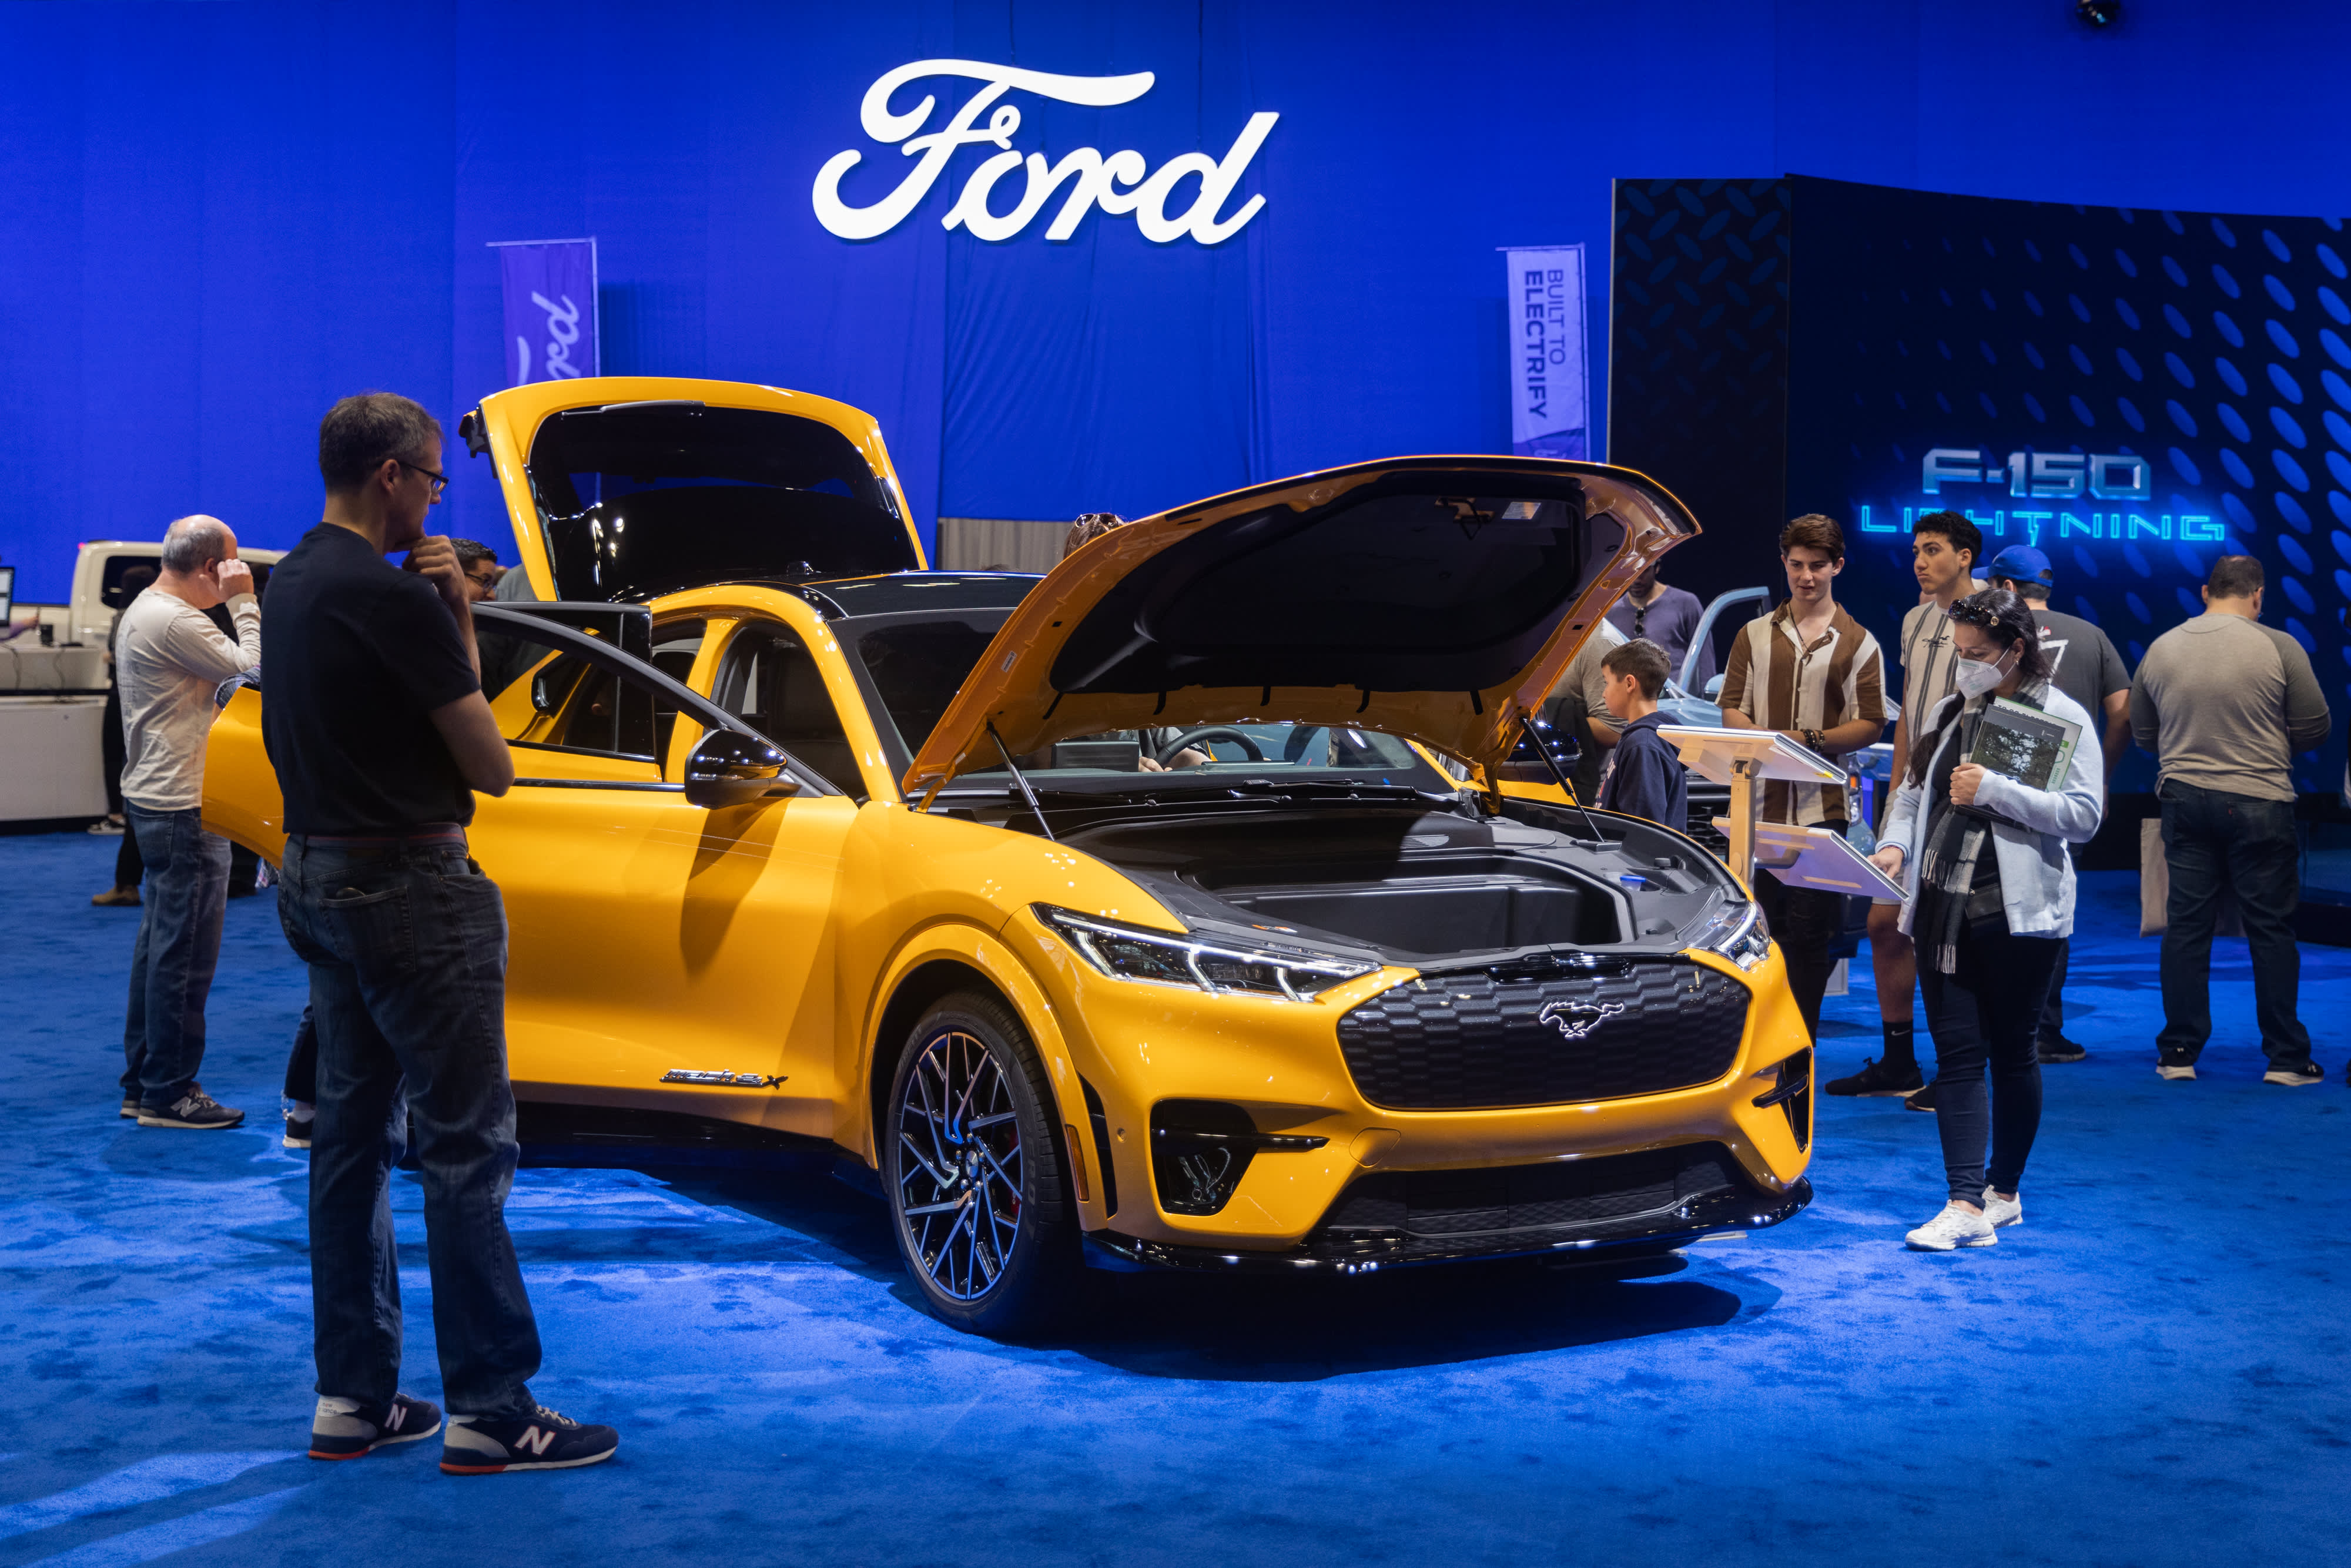 Ford’s EV price cuts could pressure profitability, a headwind the automaker needs to address